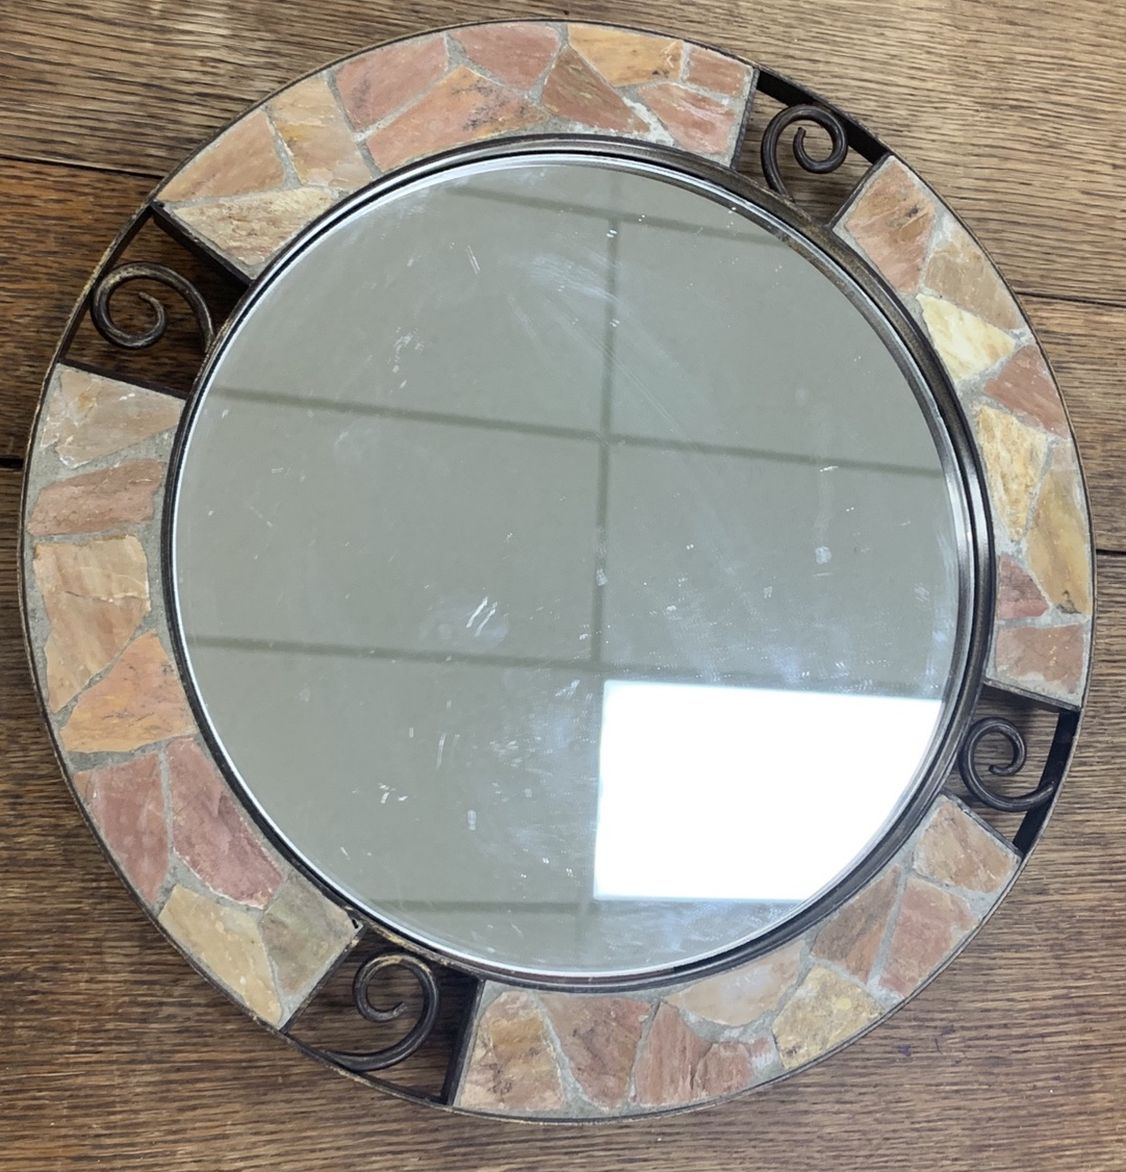 Mirror tray from Pier 1. New. Heavy. Has stone around it very pretty. You could use it in the bathroom and put your perfume bottles or anything else o